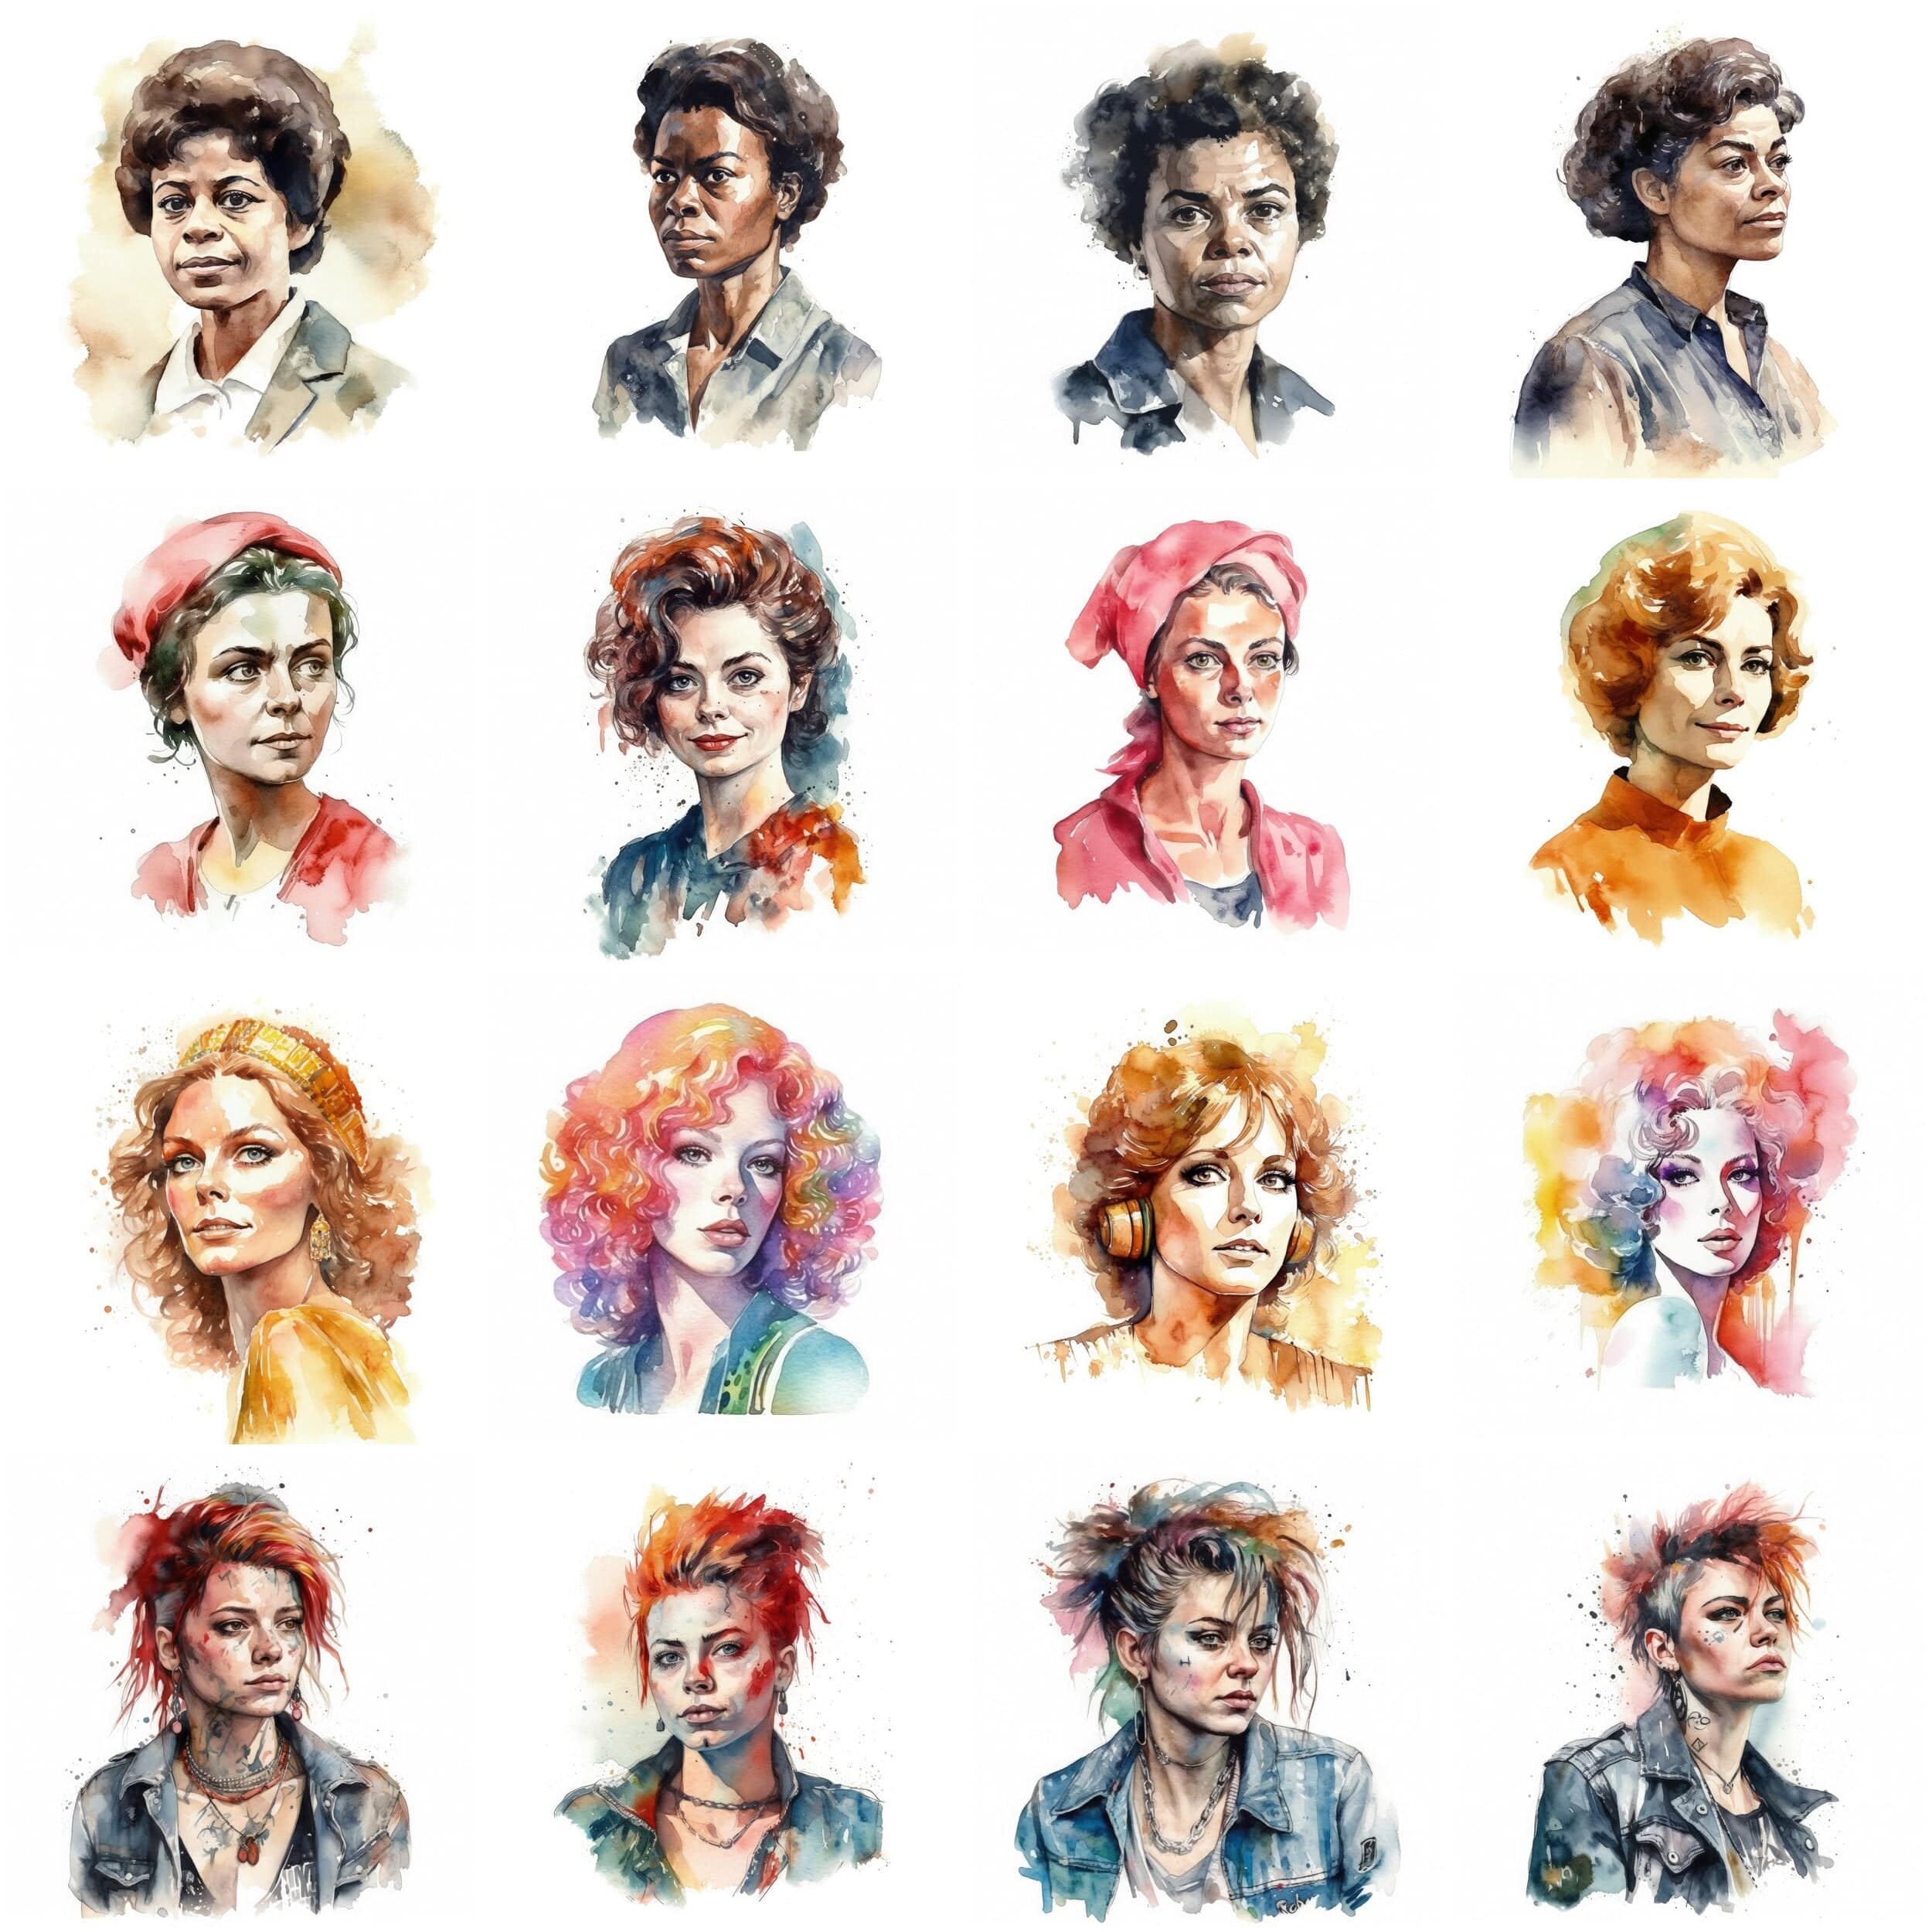 Women Through the Decades: Watercolor Portraits from the 1920s to Today - Celebrating Women From Ancient Times to the Present Day Digital Download Sumobundle